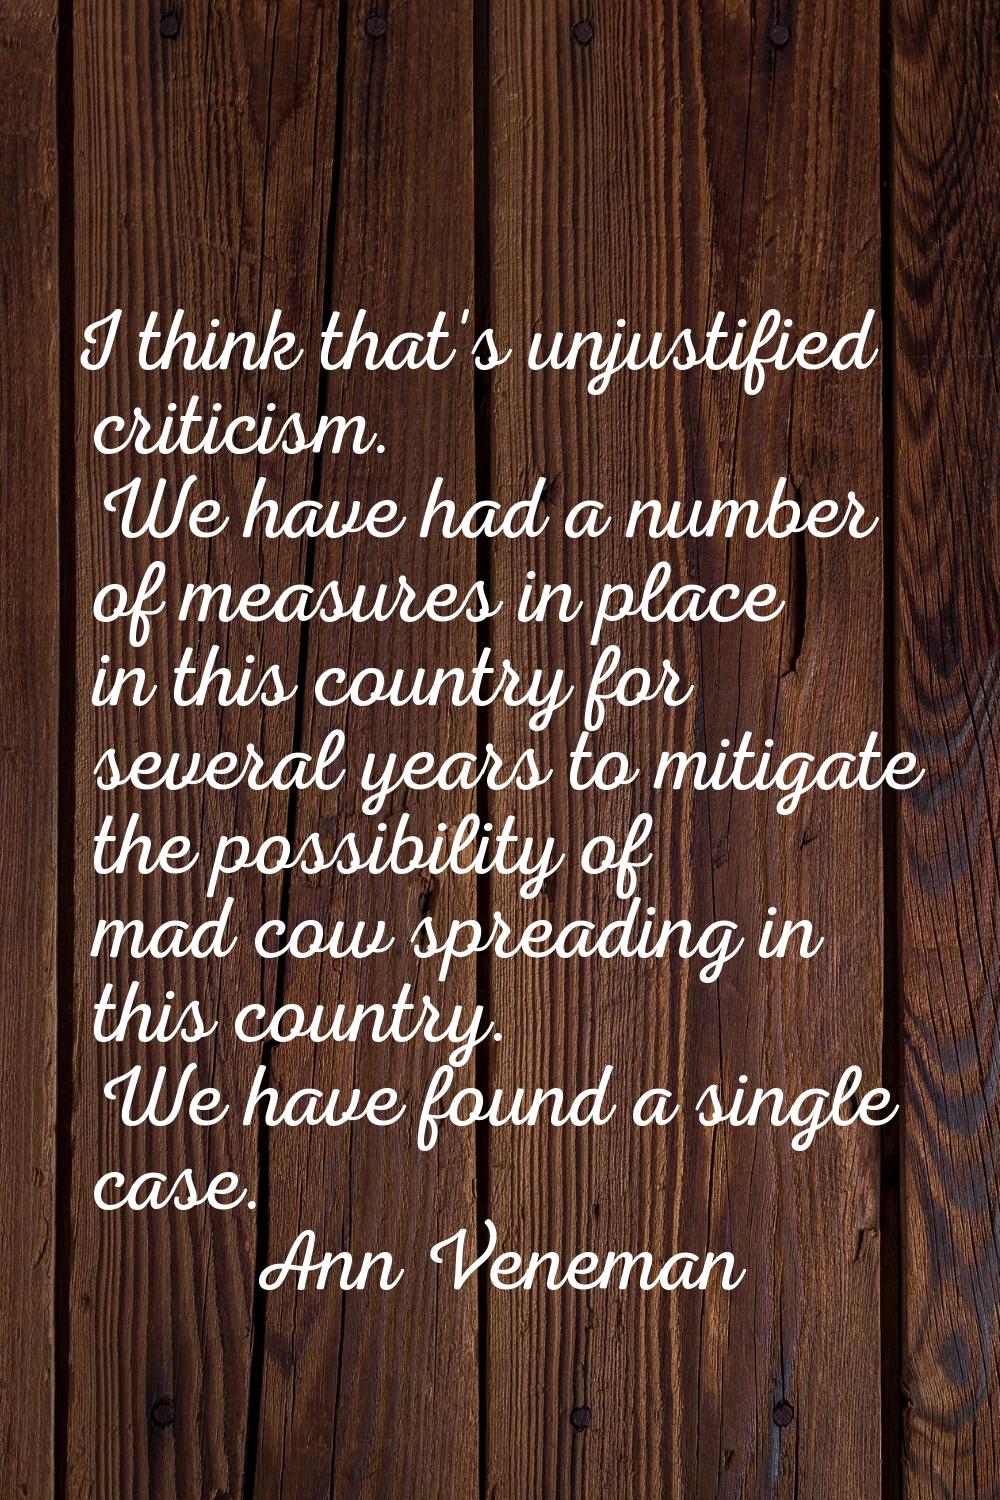 I think that's unjustified criticism. We have had a number of measures in place in this country for